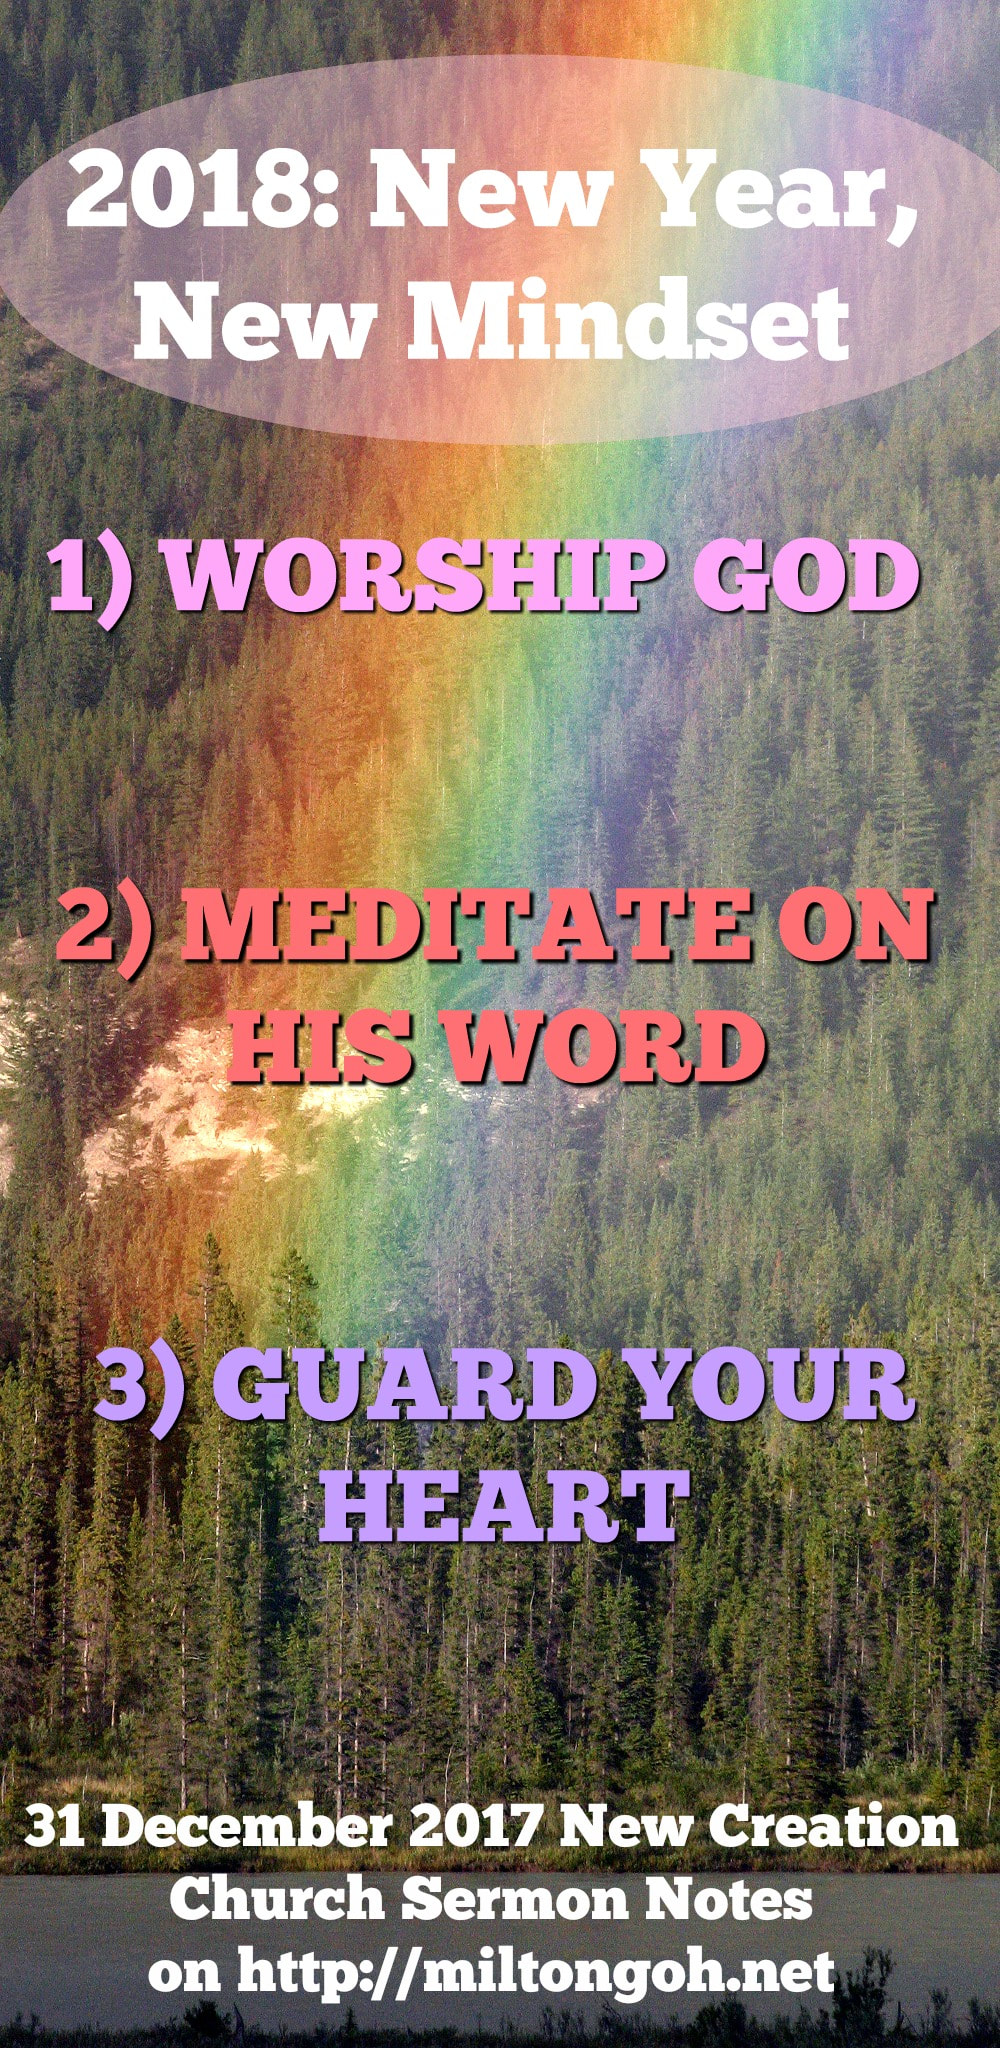 Pinterest Pinnable Image. Remember WWG: Worship God, Meditate on His word, and Guard your heart above all else! God bless you and have a very blessed New Year in 2018! 